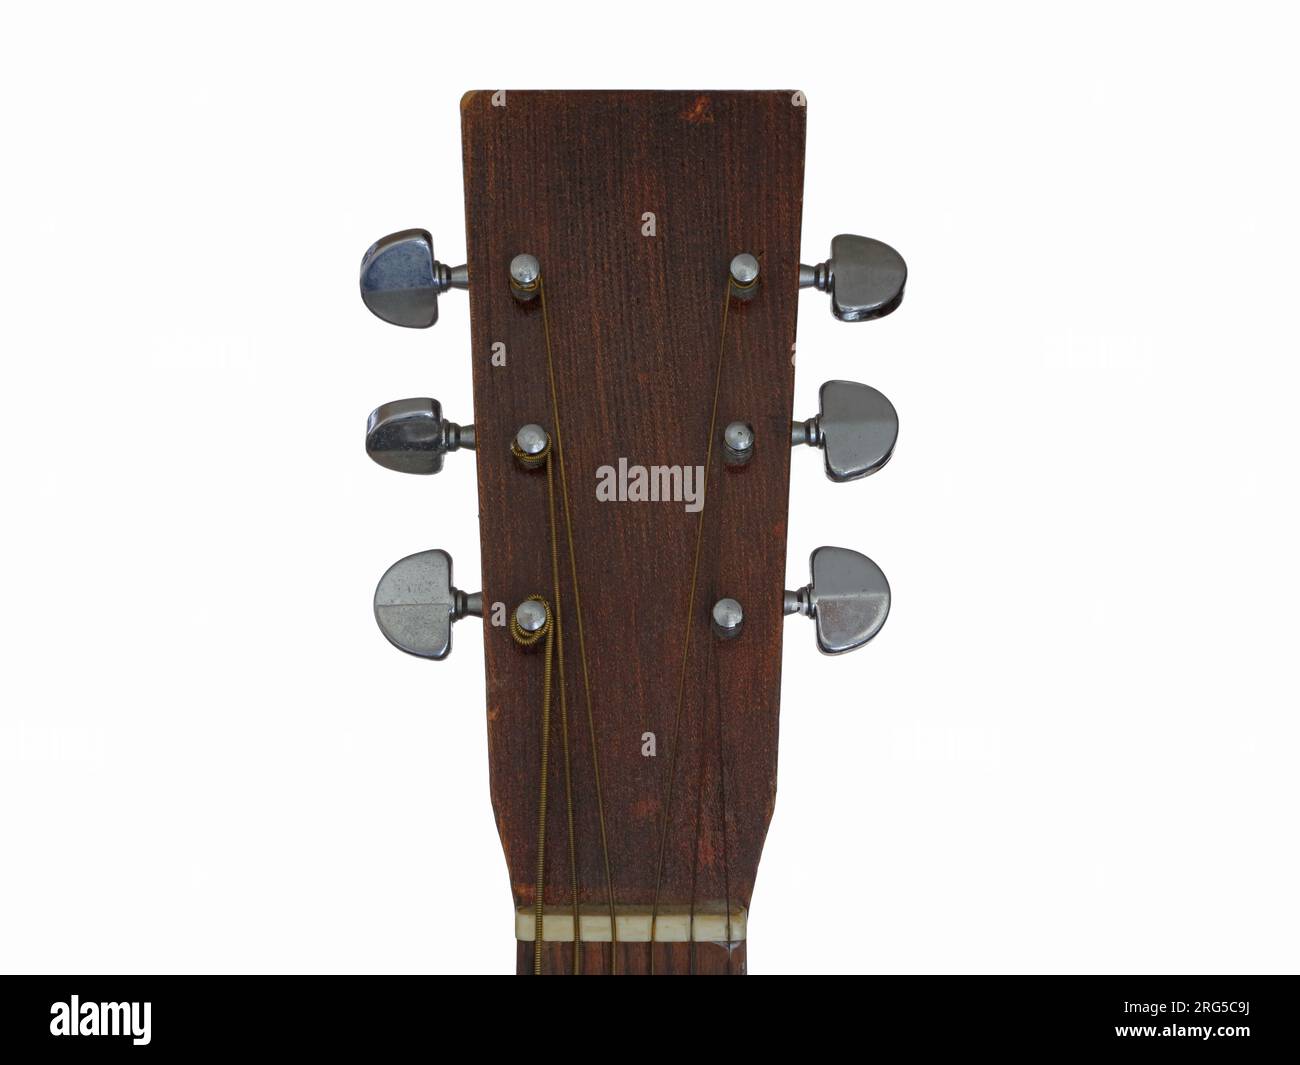 The wood headstock and tuning pegs of a homemade acoustic guitar are shown up close, set against a white background. Stock Photo